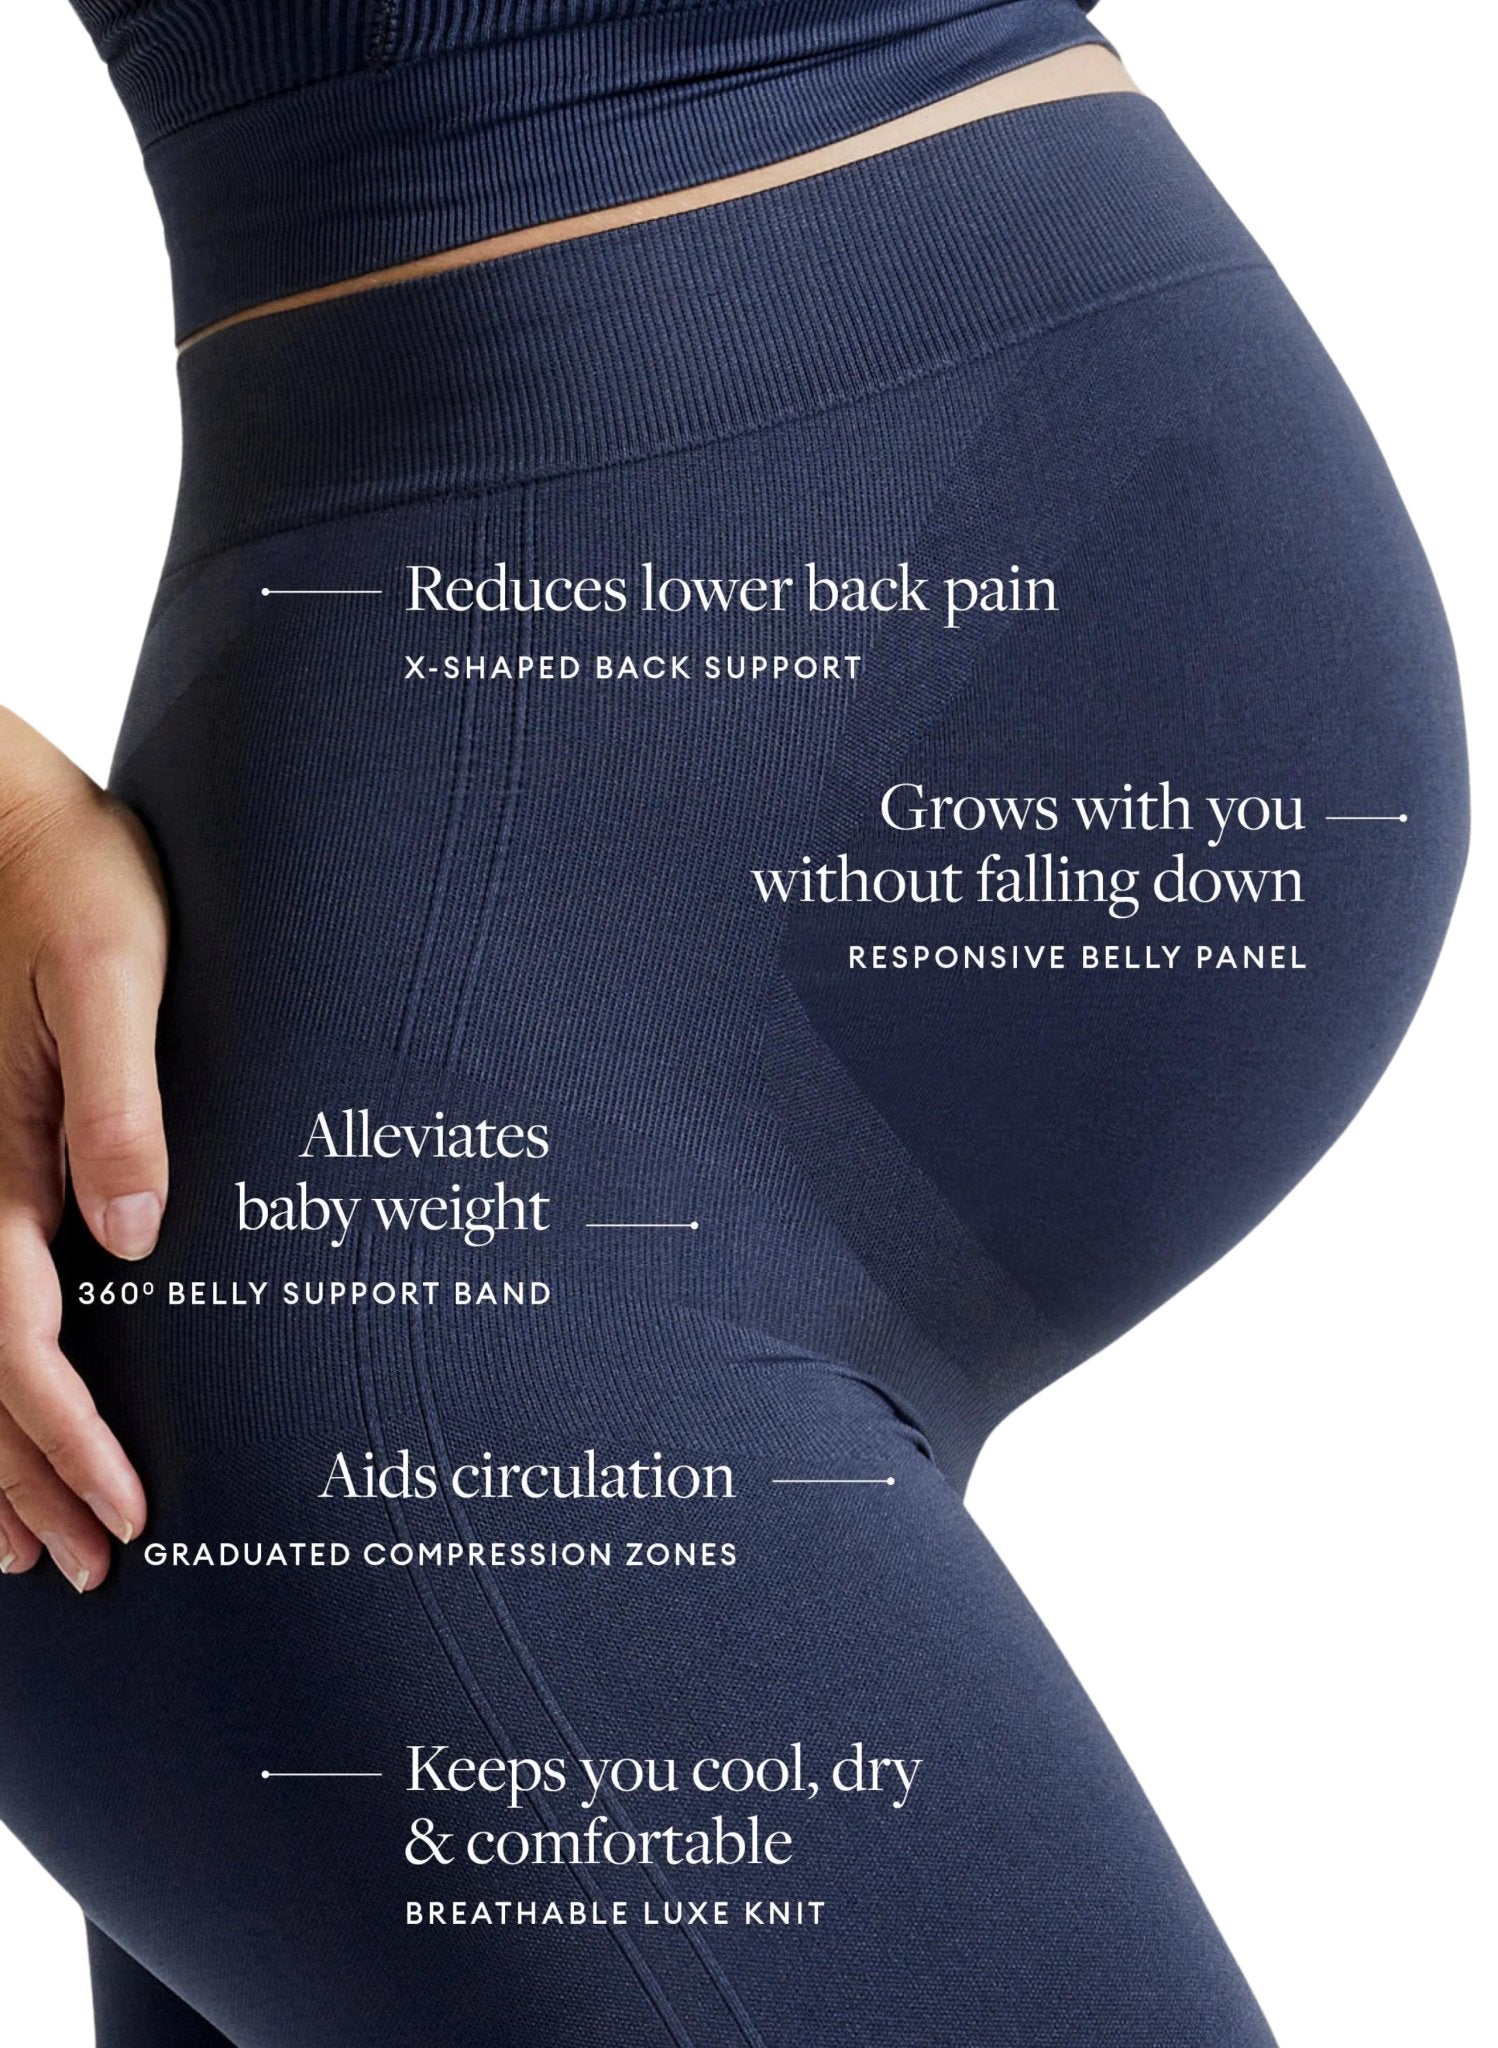 BLANQI Maternity Belly Support Leggings - Royale Blue – Mums and Bumps